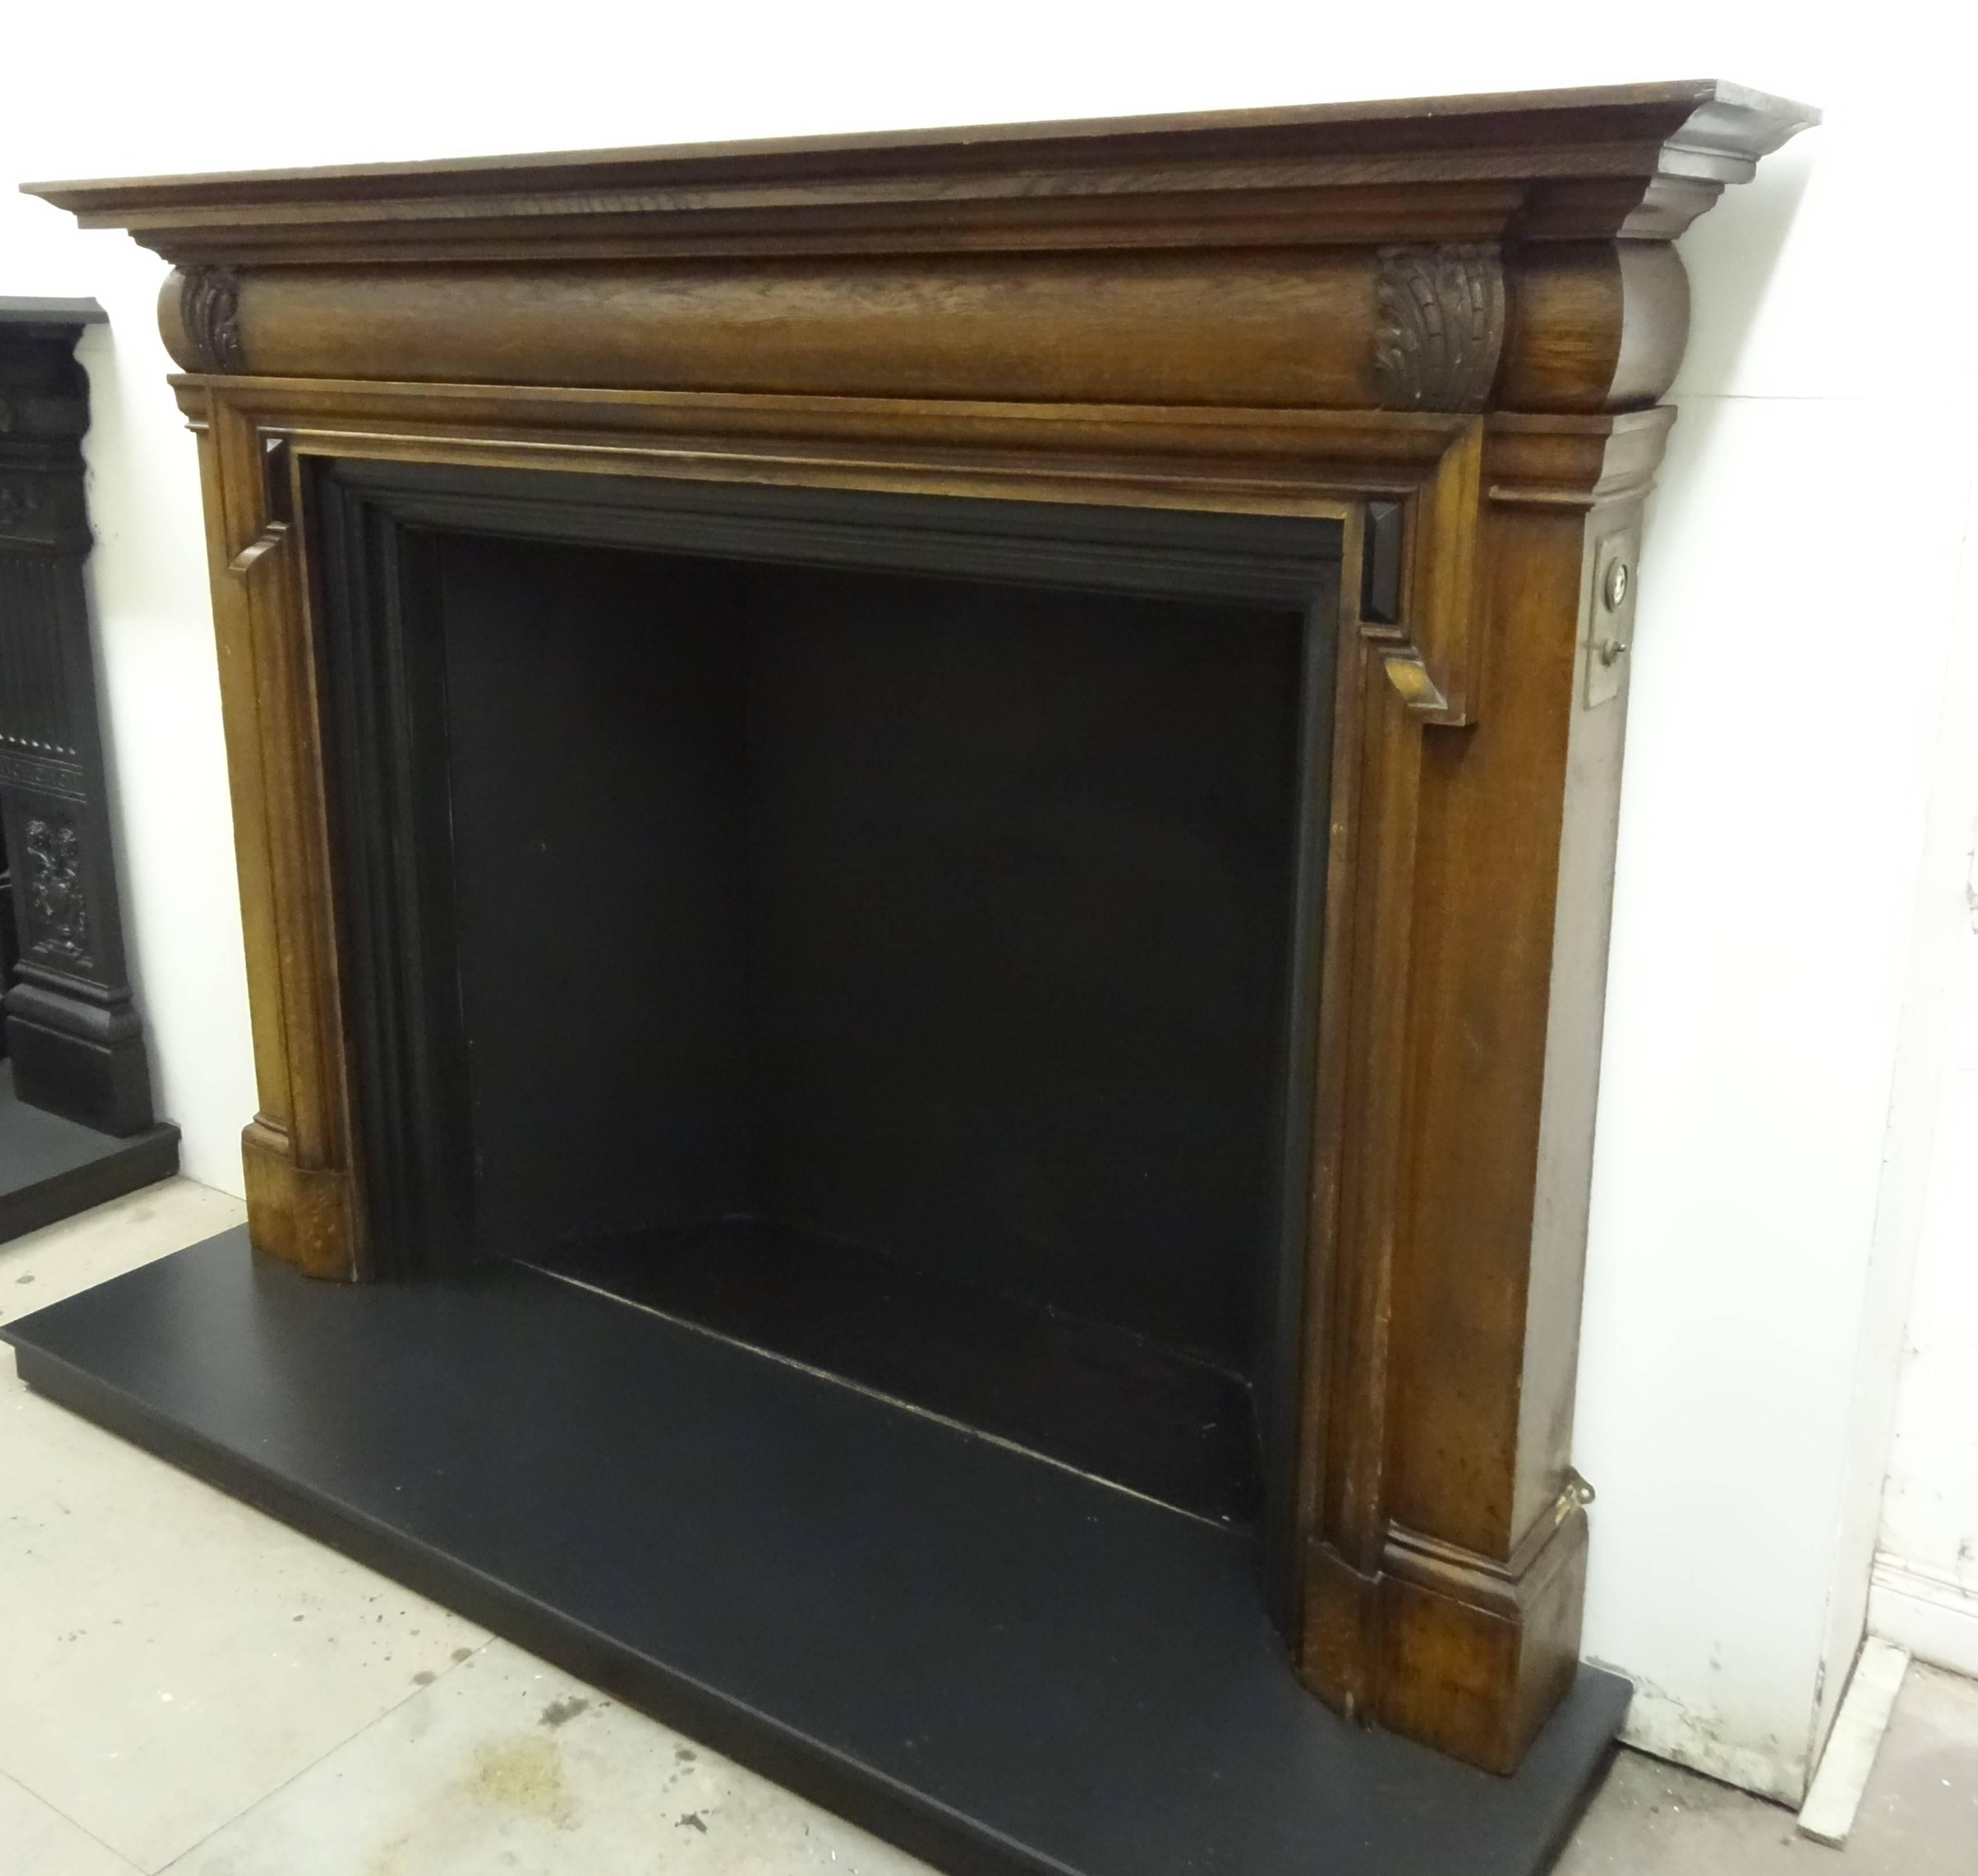 Northern Irish 19th Century Victorian Carved Oak and Ebony Bolection Fire Surround For Sale